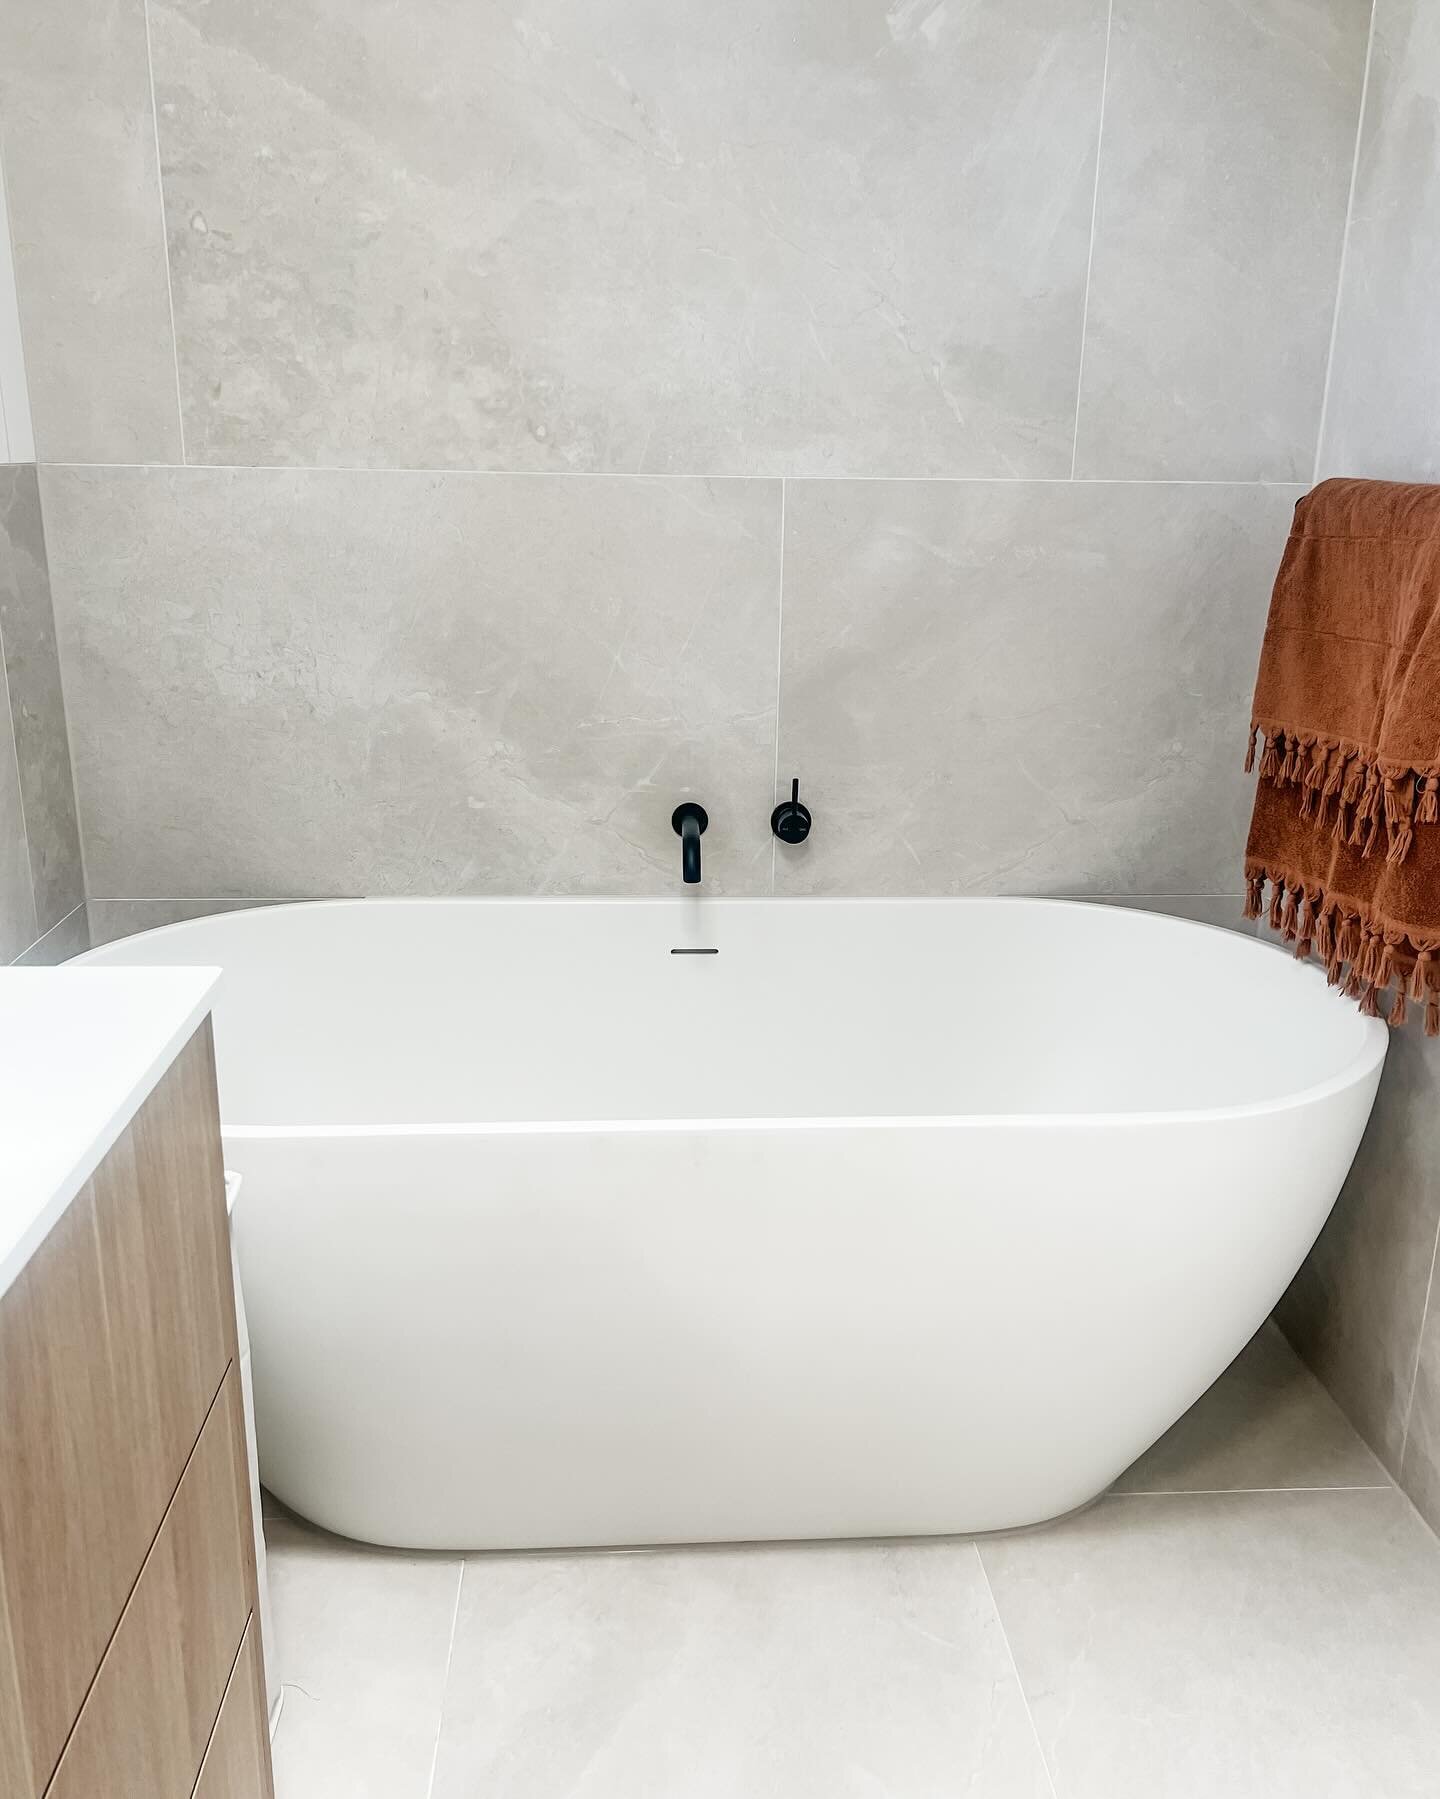 Soothing, relaxing and inviting 🛀 the mood and feels I wanted to achieve for this bathroom. 

From a practically perspective, storage, light, and space. Space was the real challenge as we didn&rsquo;t have much to work with! We utilized as much spac